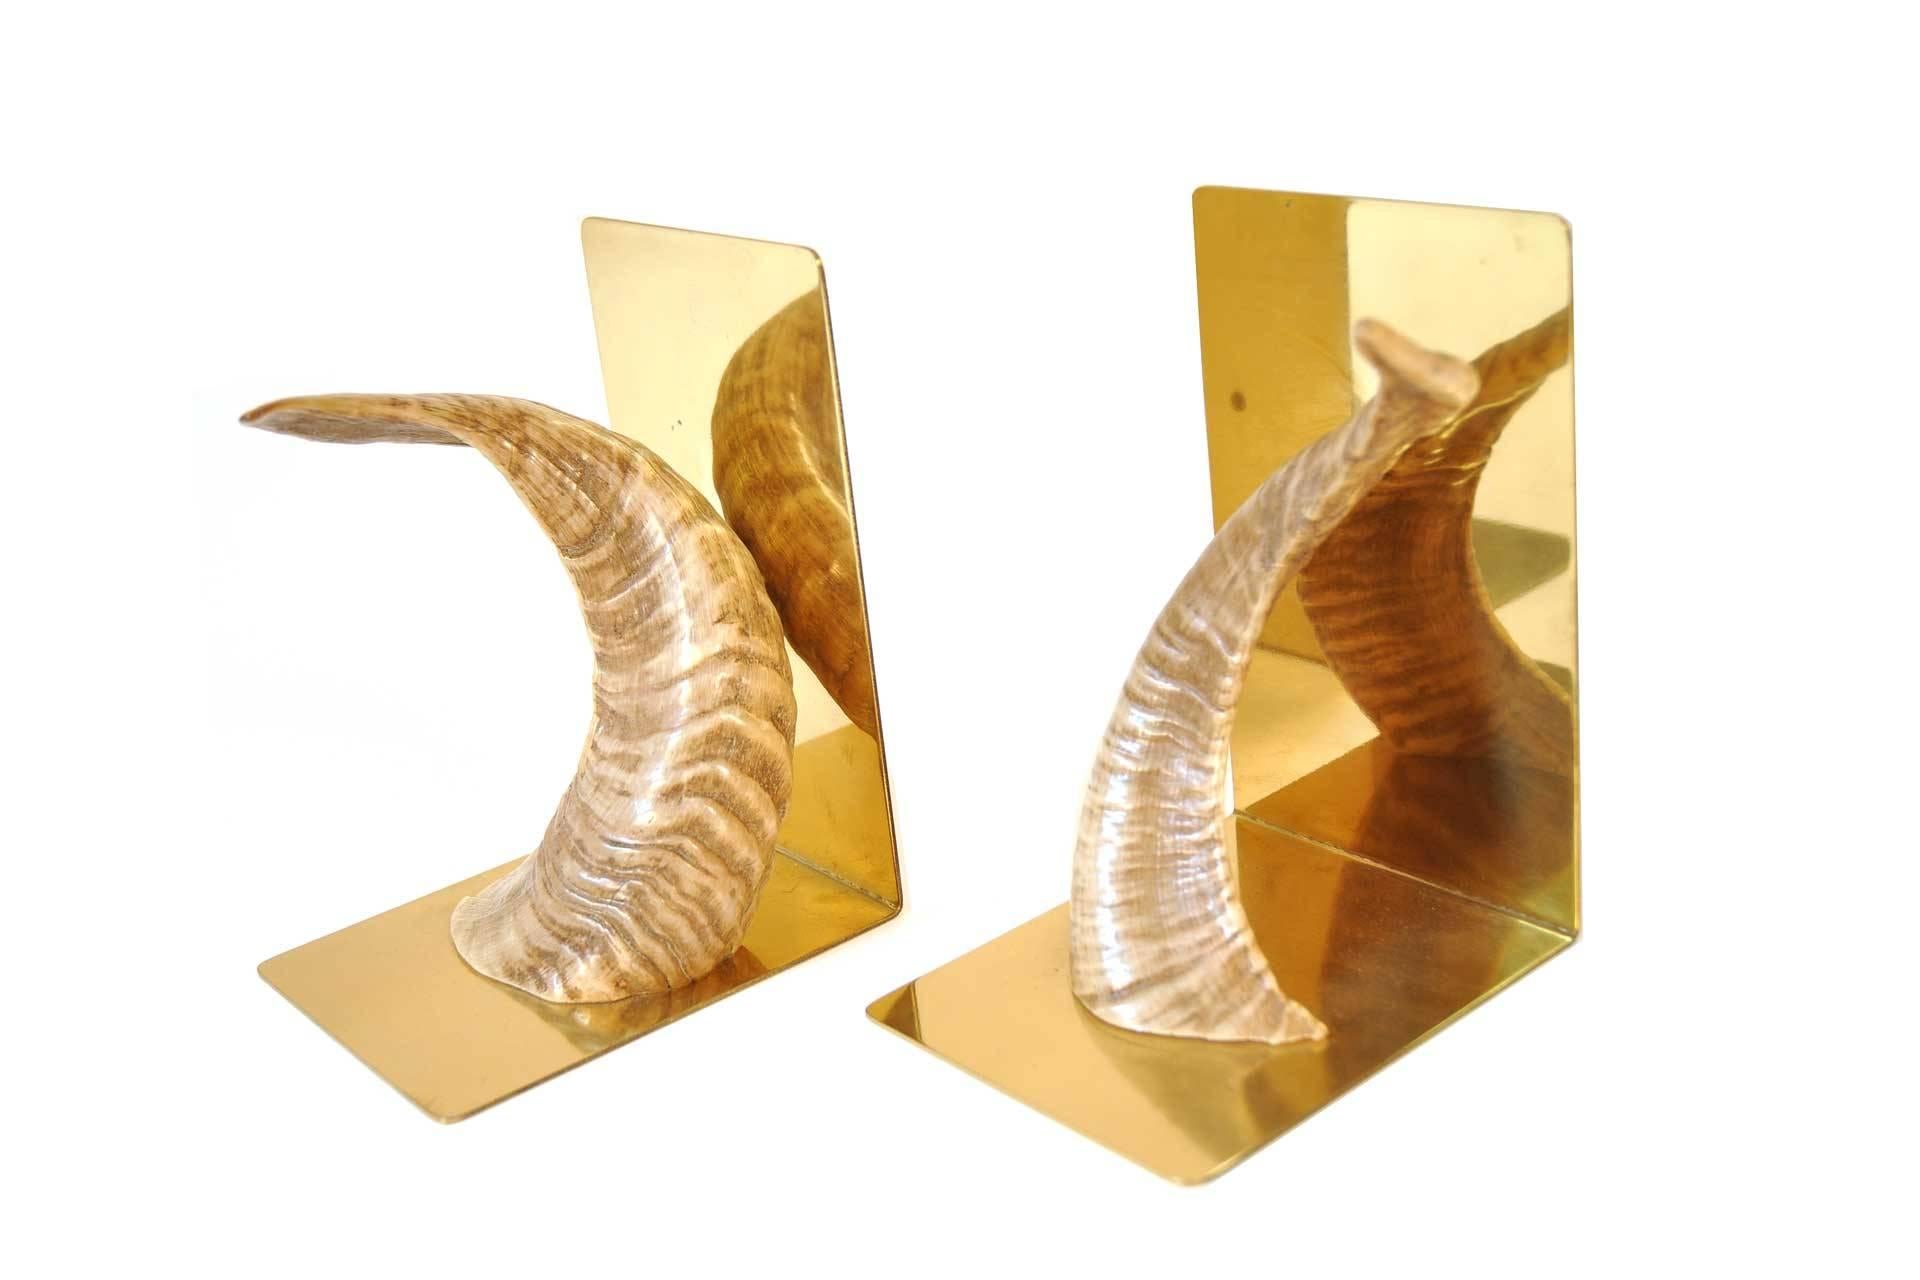 This pair of bookends was manufactured by Carl Auböck Werkstätte in Vienna in 1950s. The winding horns are fixed on a polish brass base. Mod. nr. 5673.